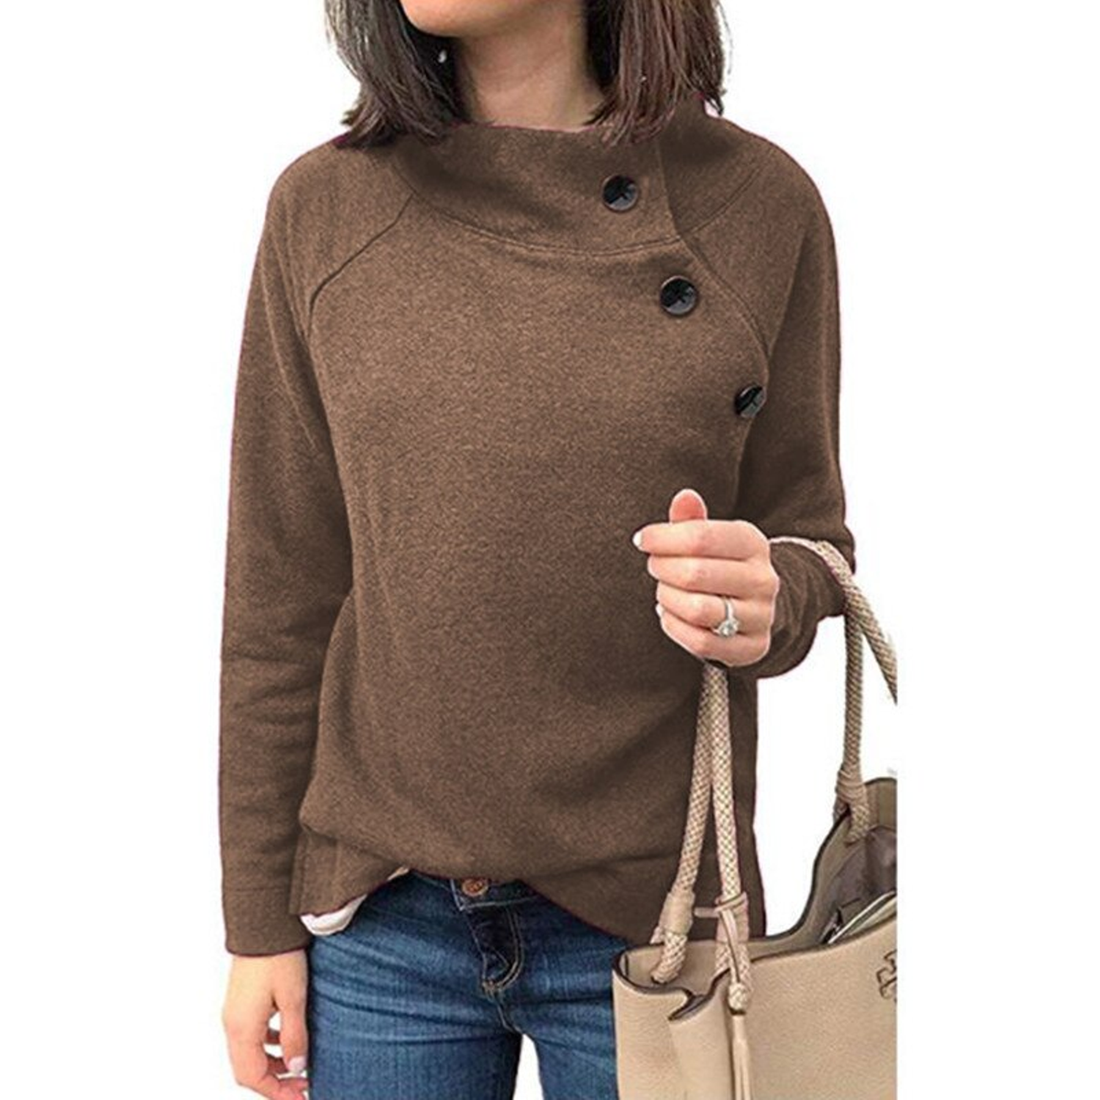 Women's Autumn Casual Solid Sweatshirt With Buttons